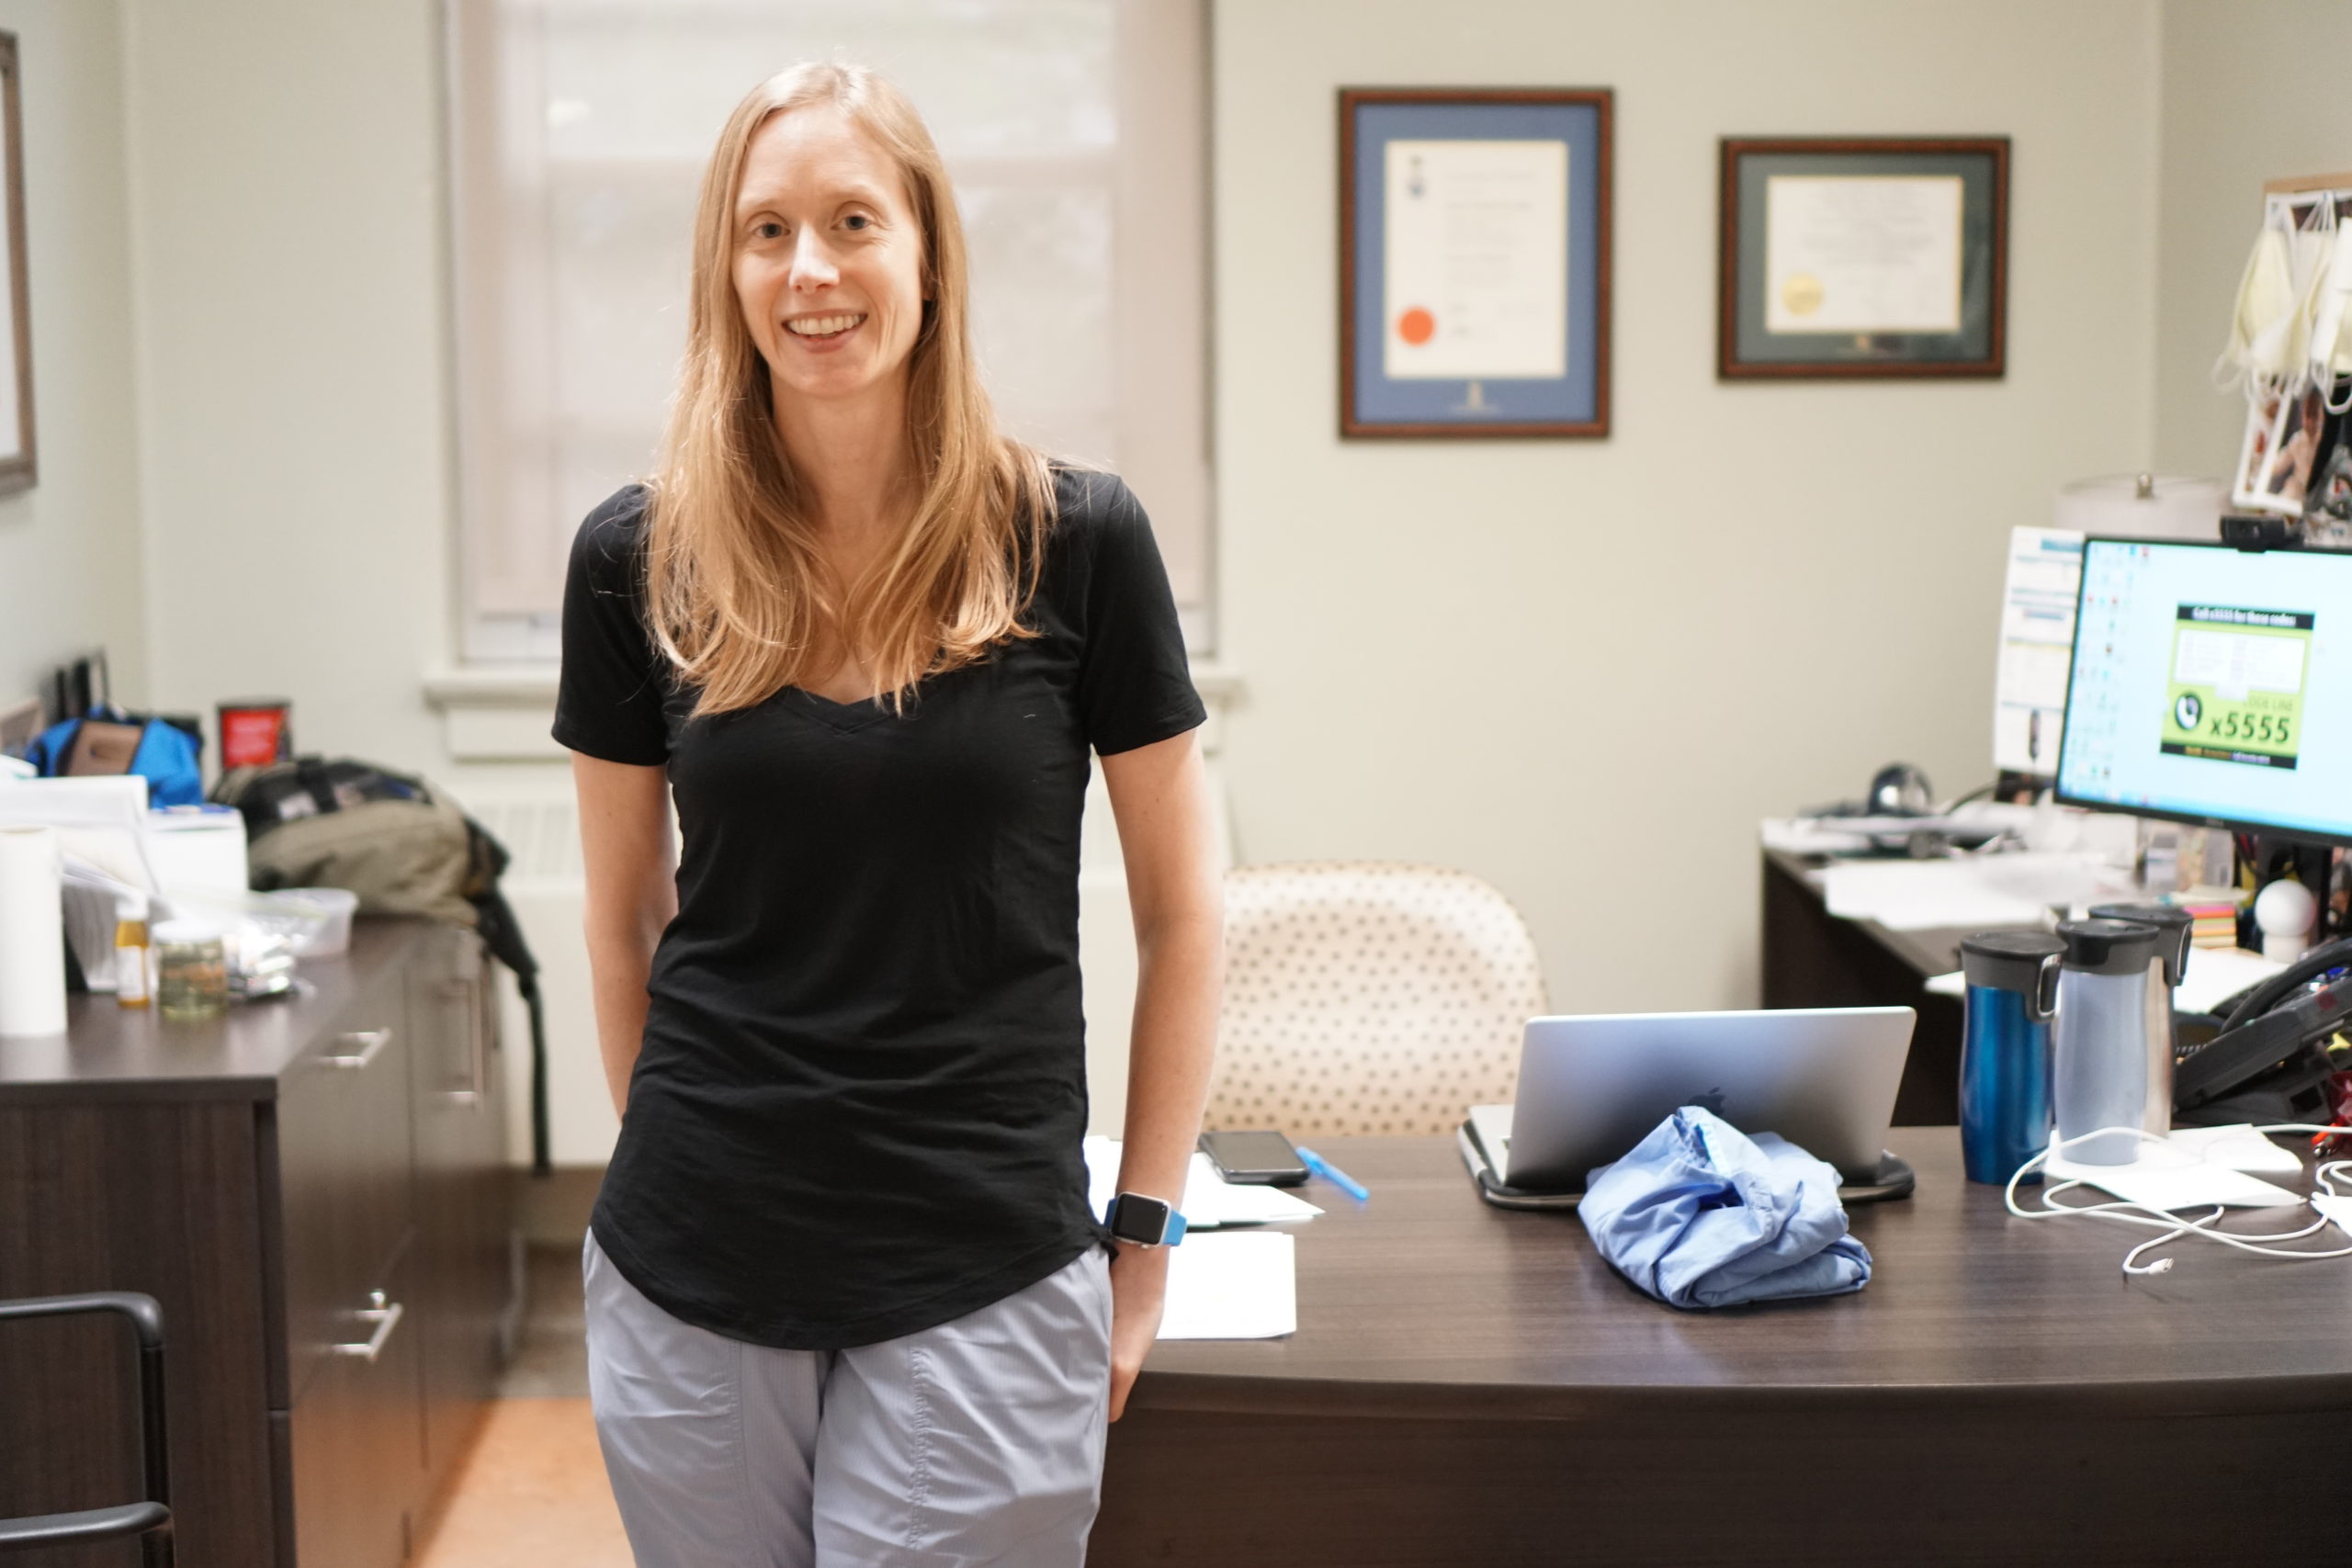 Dr. Janine McCready poses in her office at Michael Garron Hospital